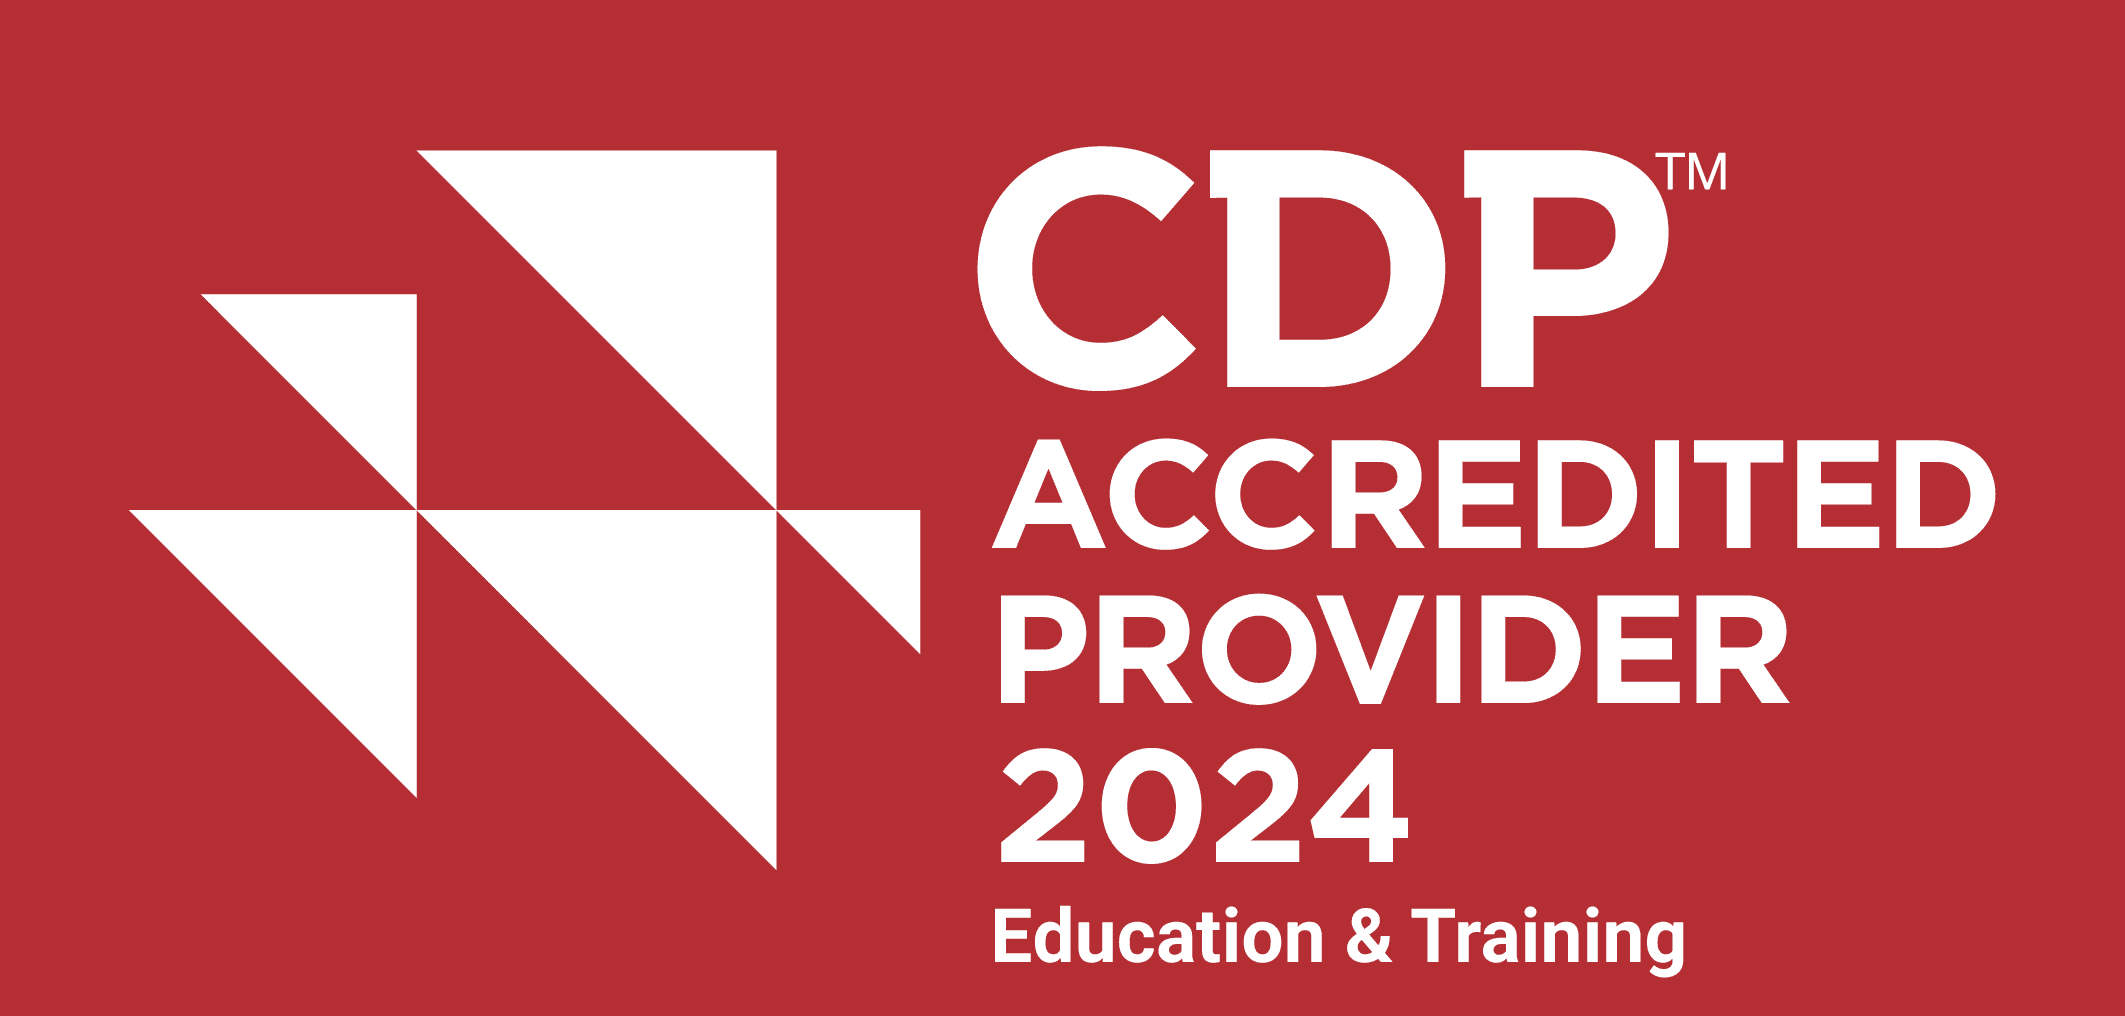 CDP Accredited Provier 2024